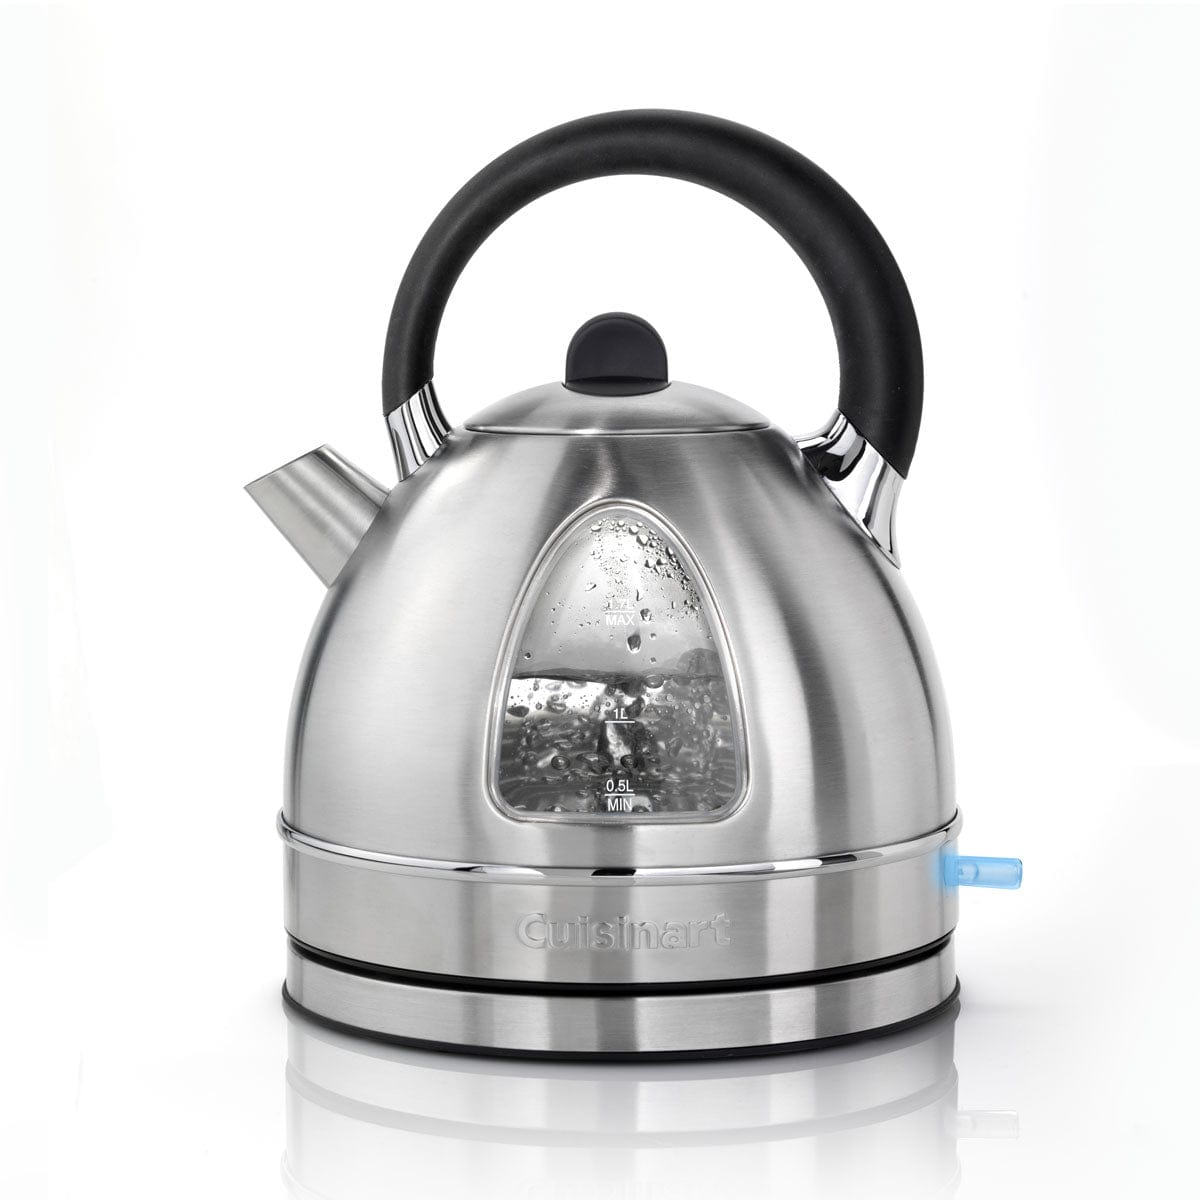 Cuisinart CTK17U Signature Collection Traditional Kettle